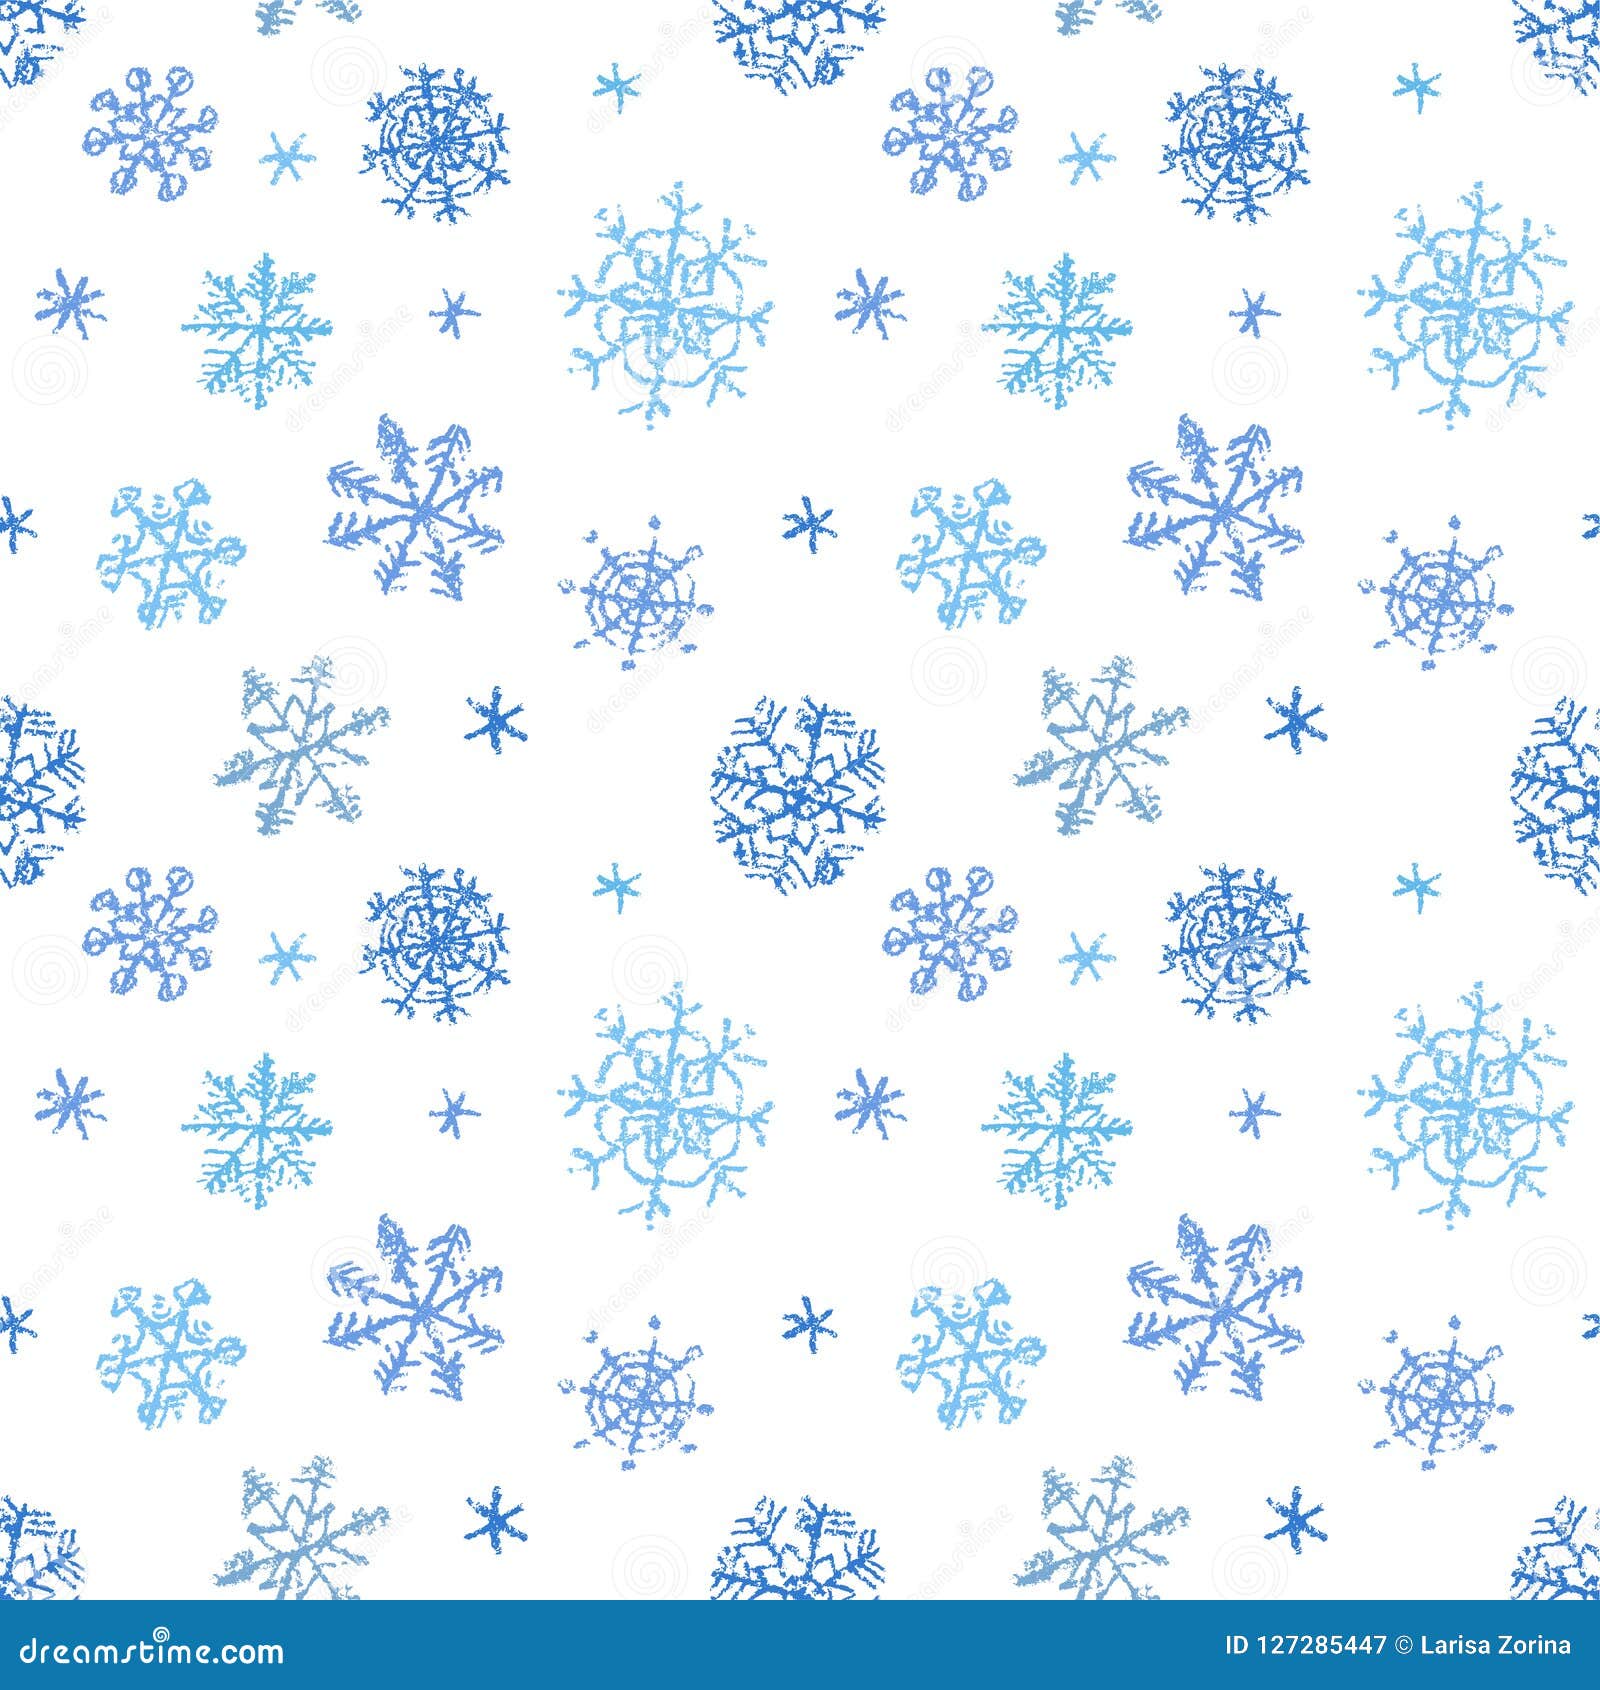 Blue background with falling white snowflakes on Craiyon